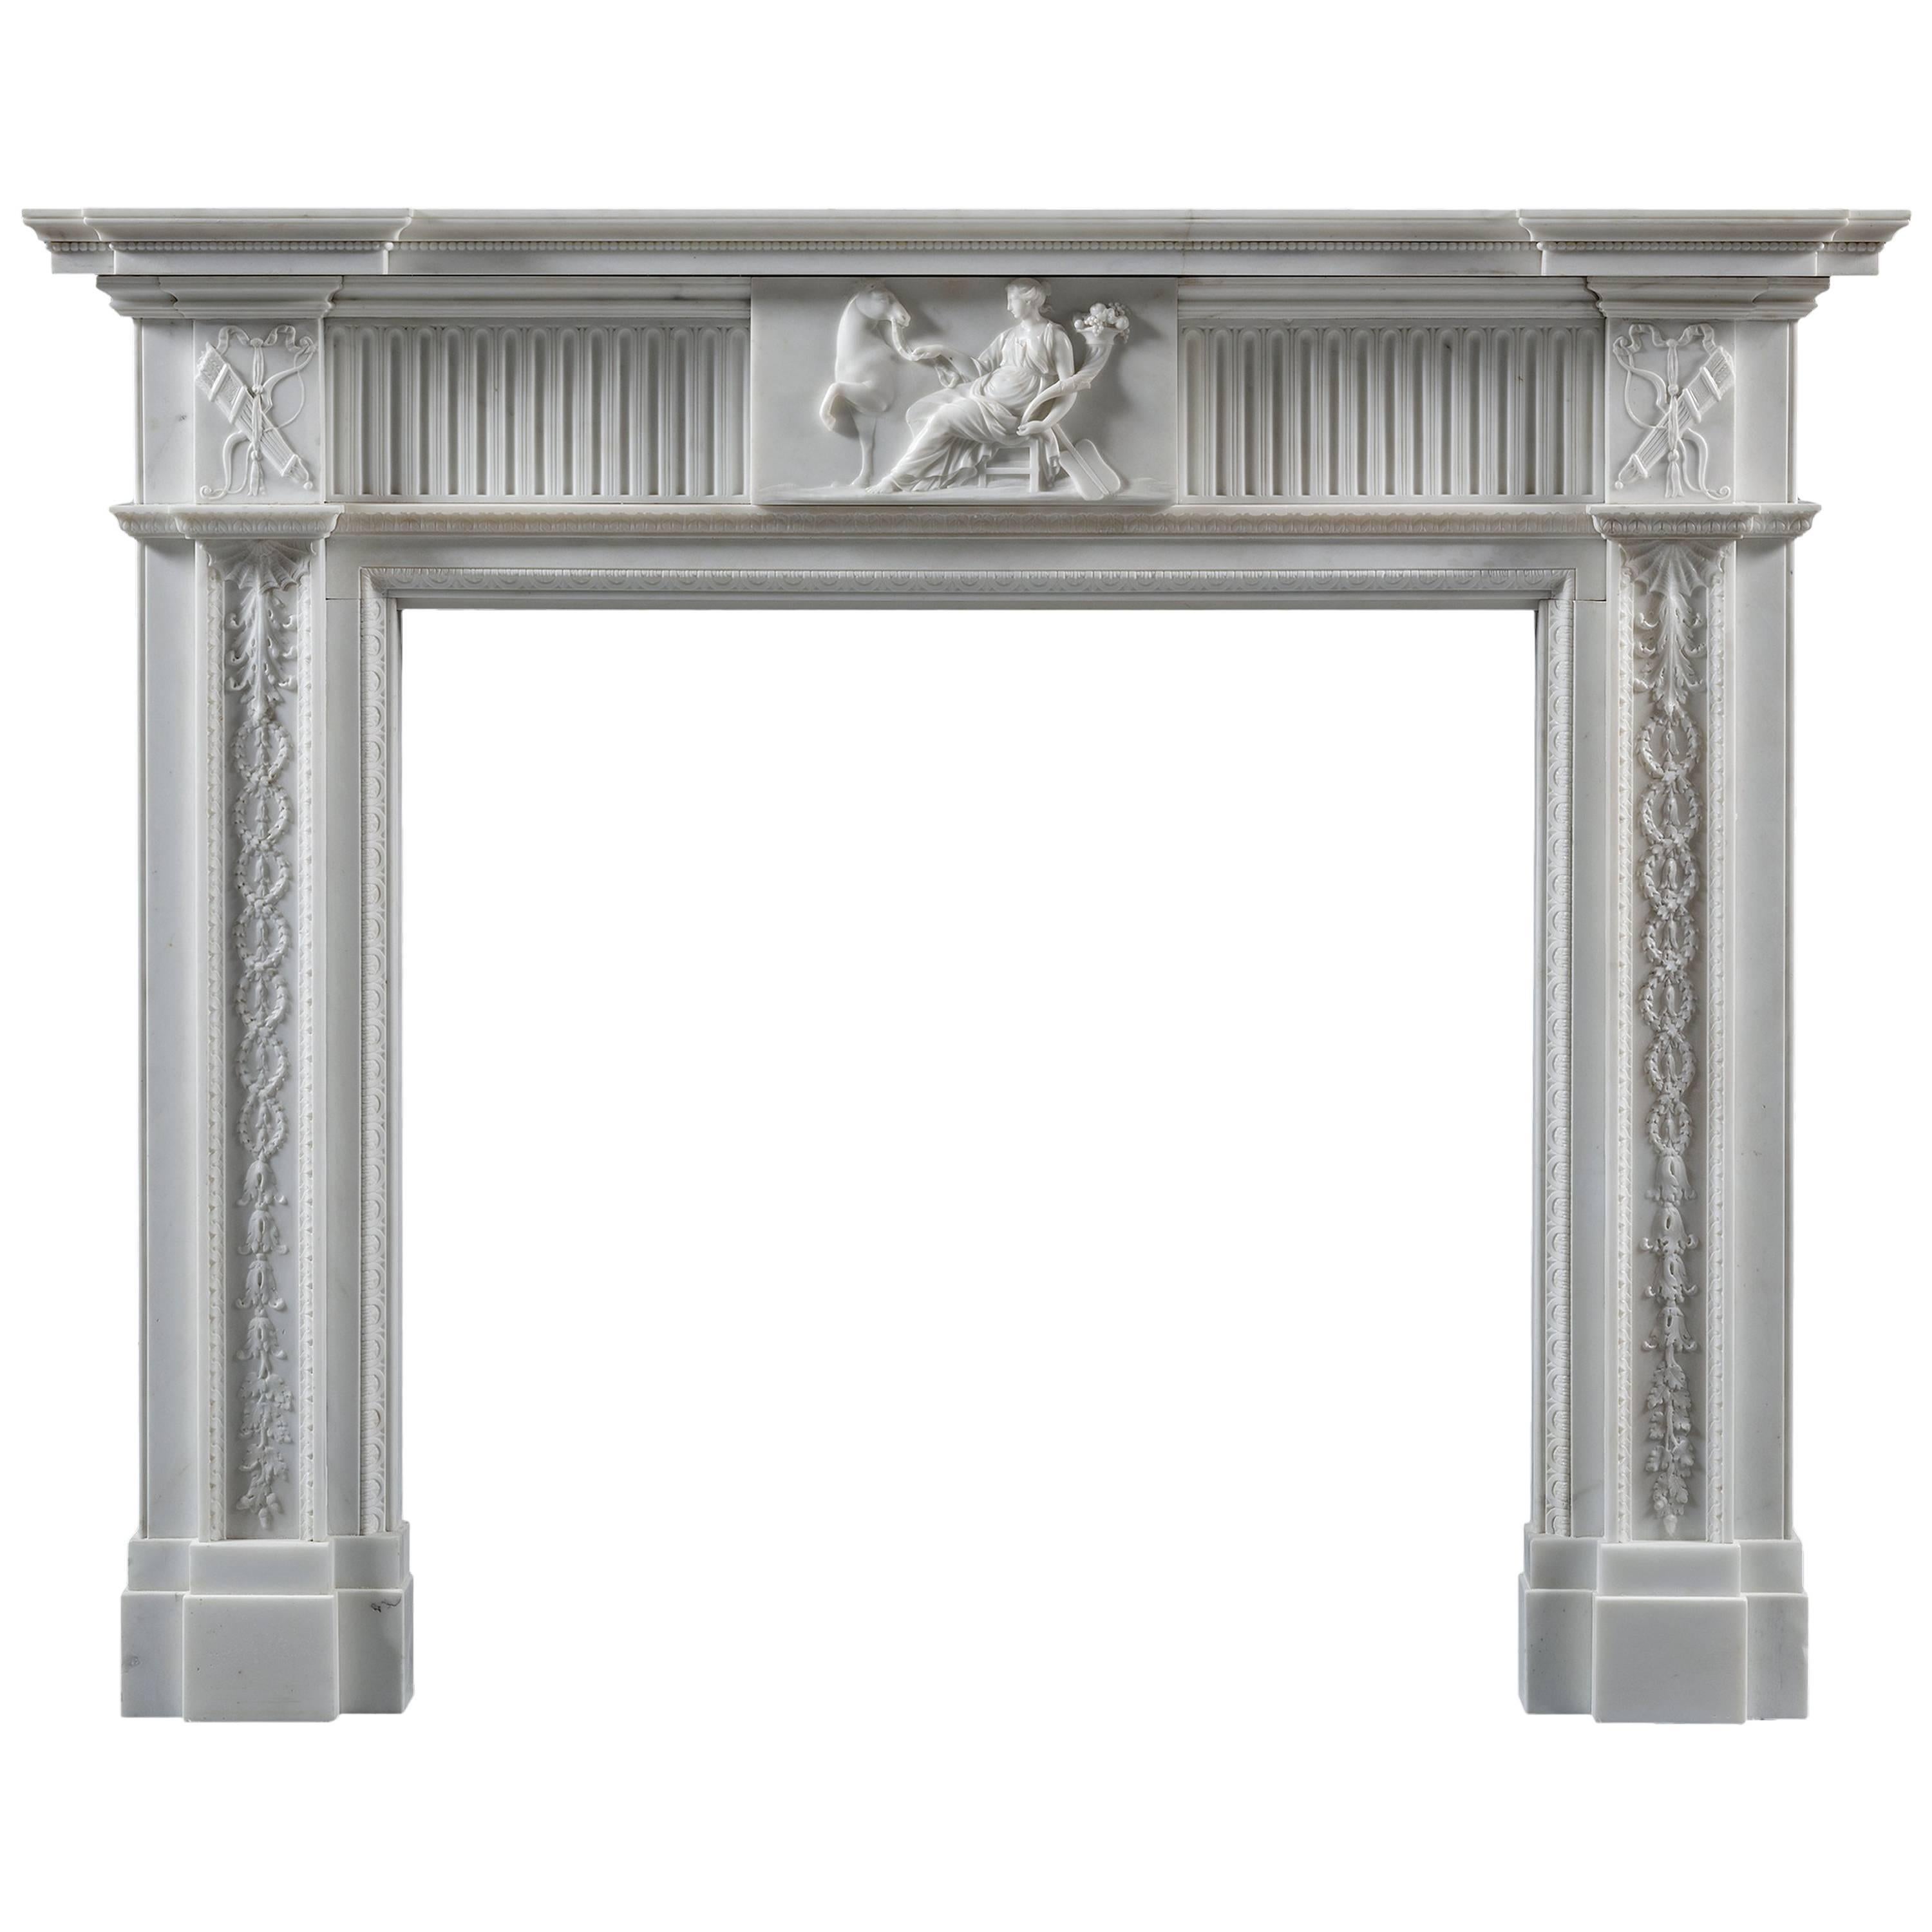 Late 18th Century Statuary Marble Fireplace in the Neoclassical Style